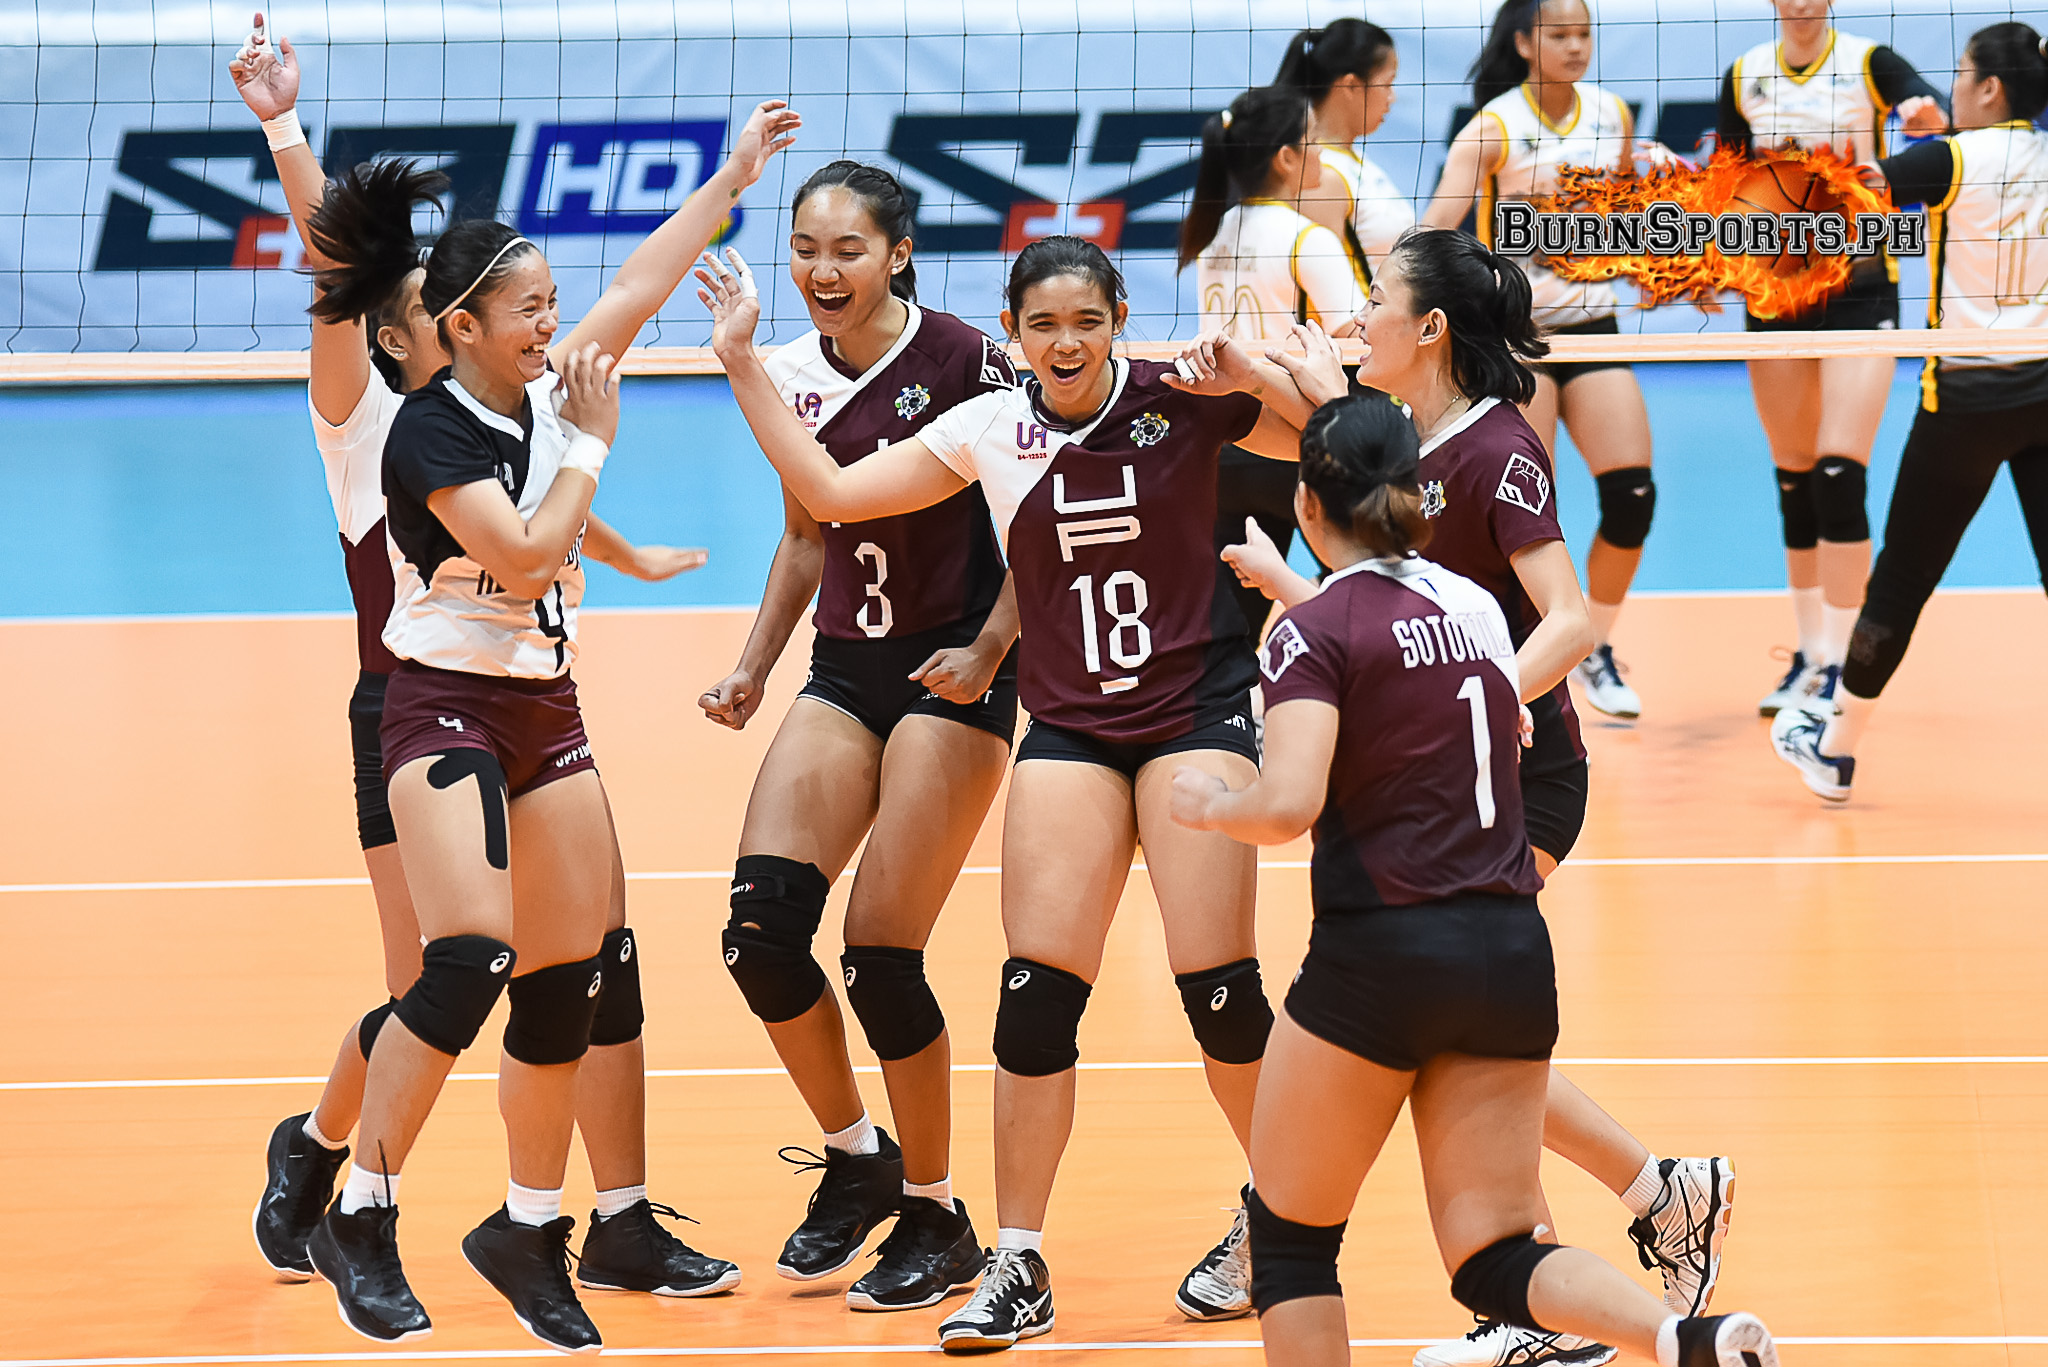 UP Lady Maroons prevail anew over La Salle